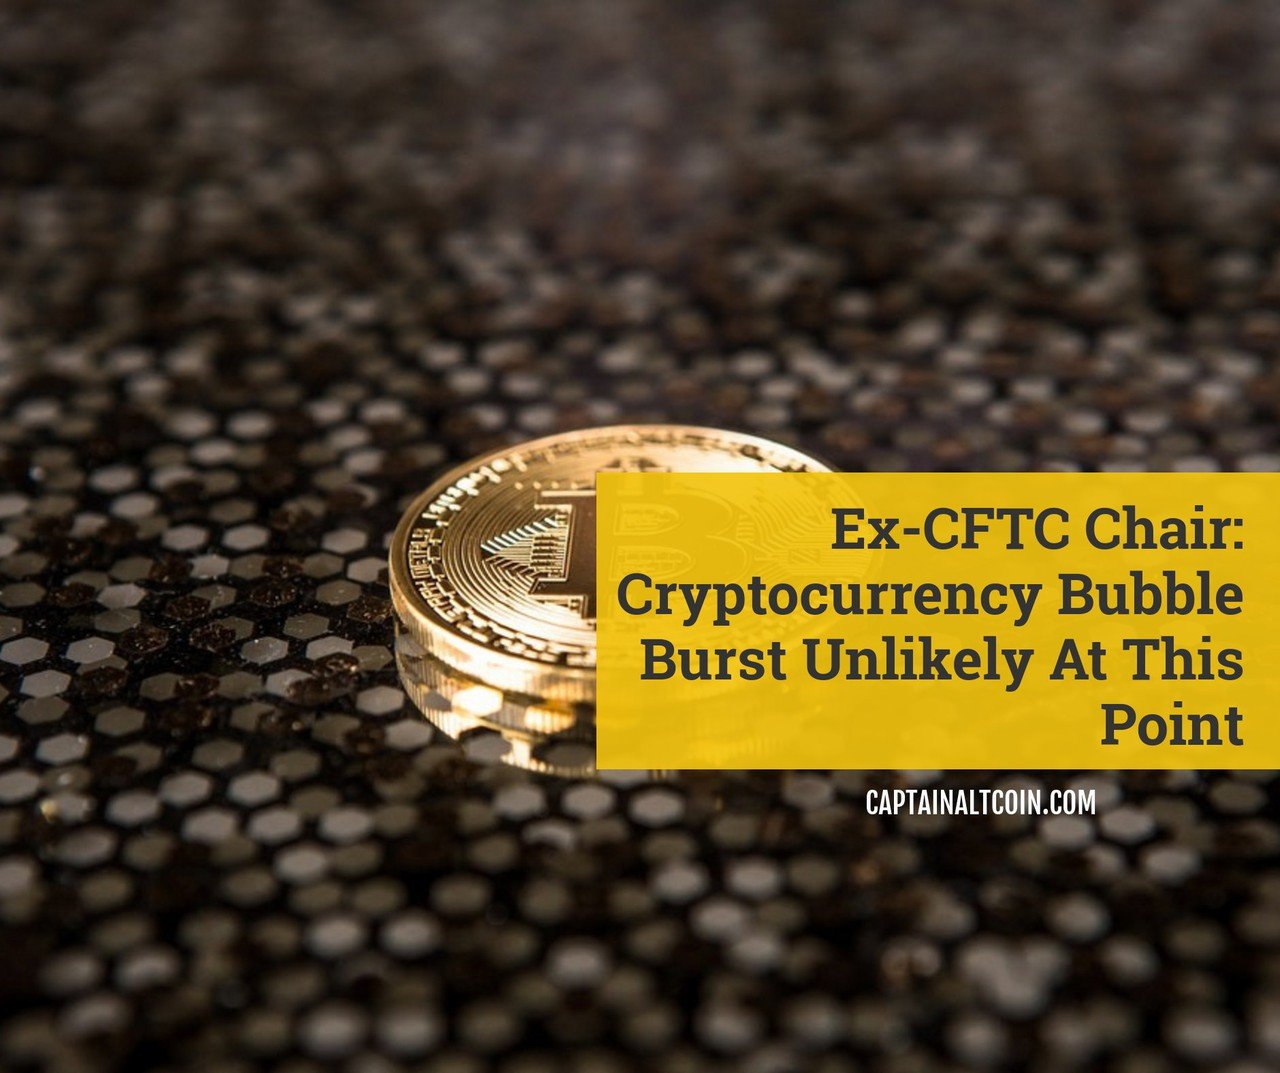 Ex-CFTC Chair: Cryptocurrency Bubble Burst Unlikely At This Point